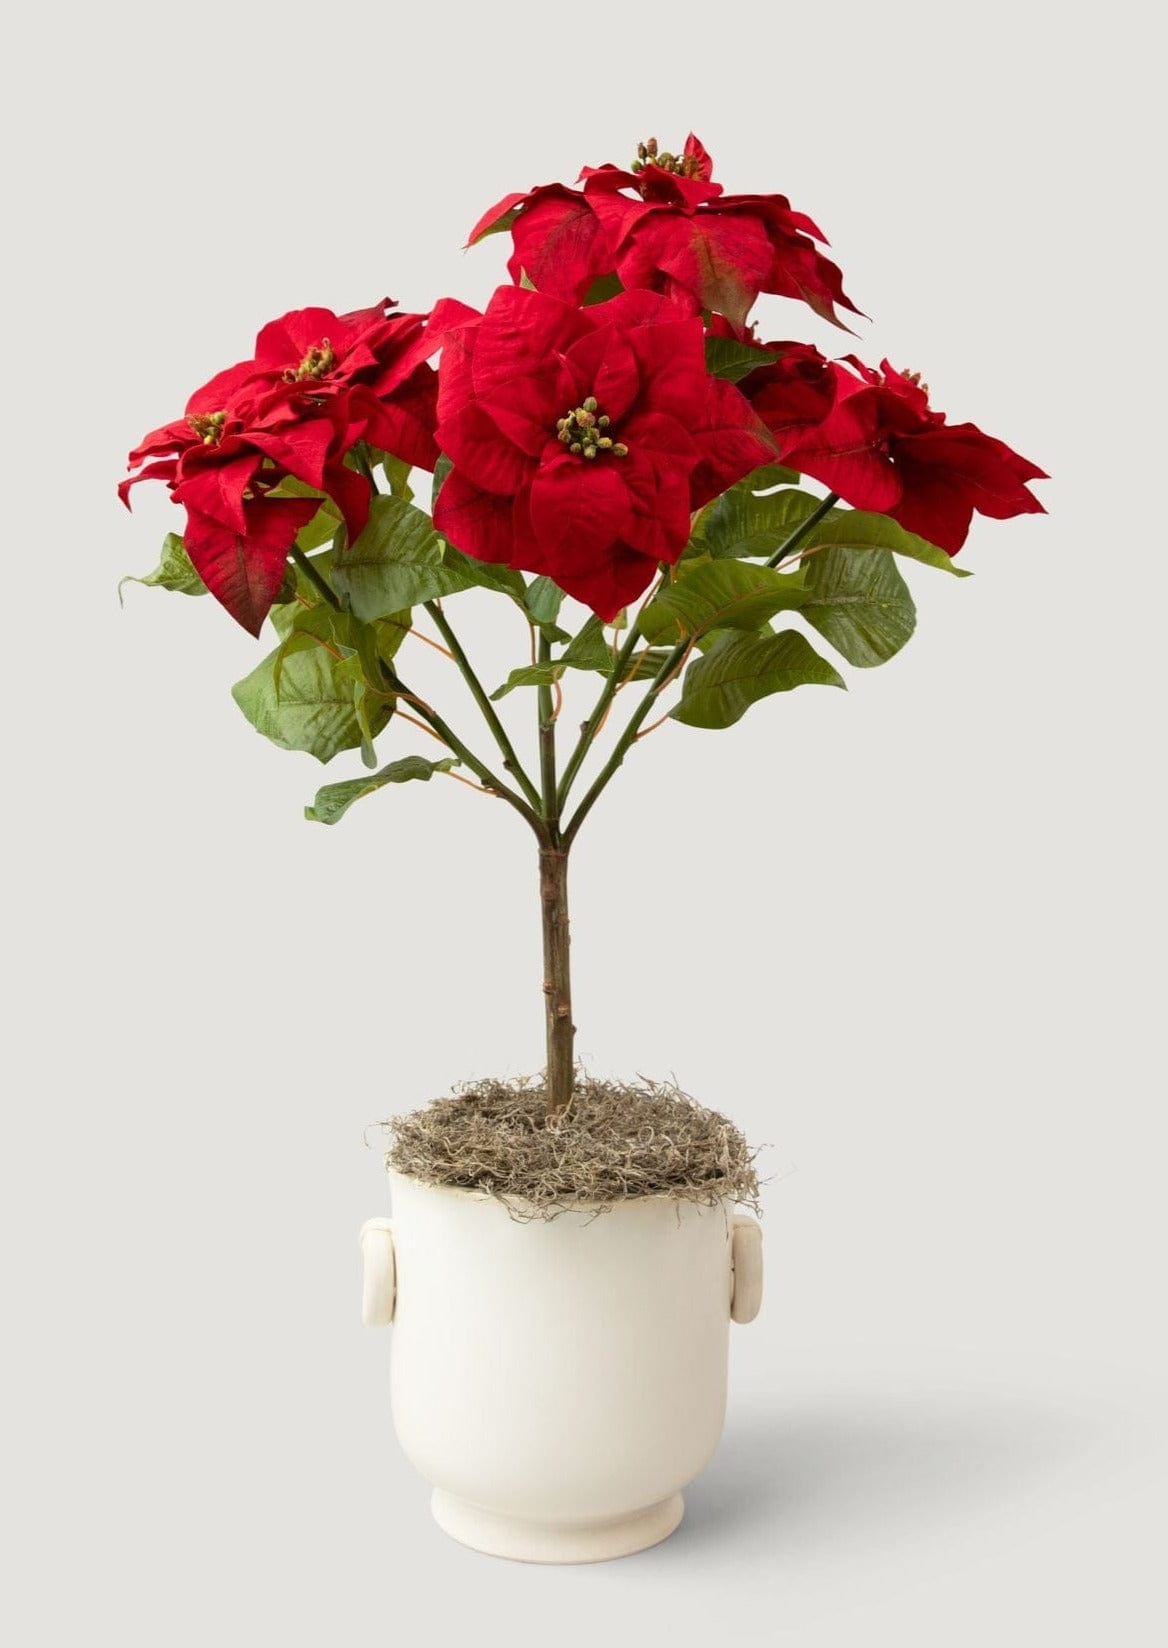 Faux Red Poinsettia Potted Plant Styled in Cream Pot with Spanish Moss